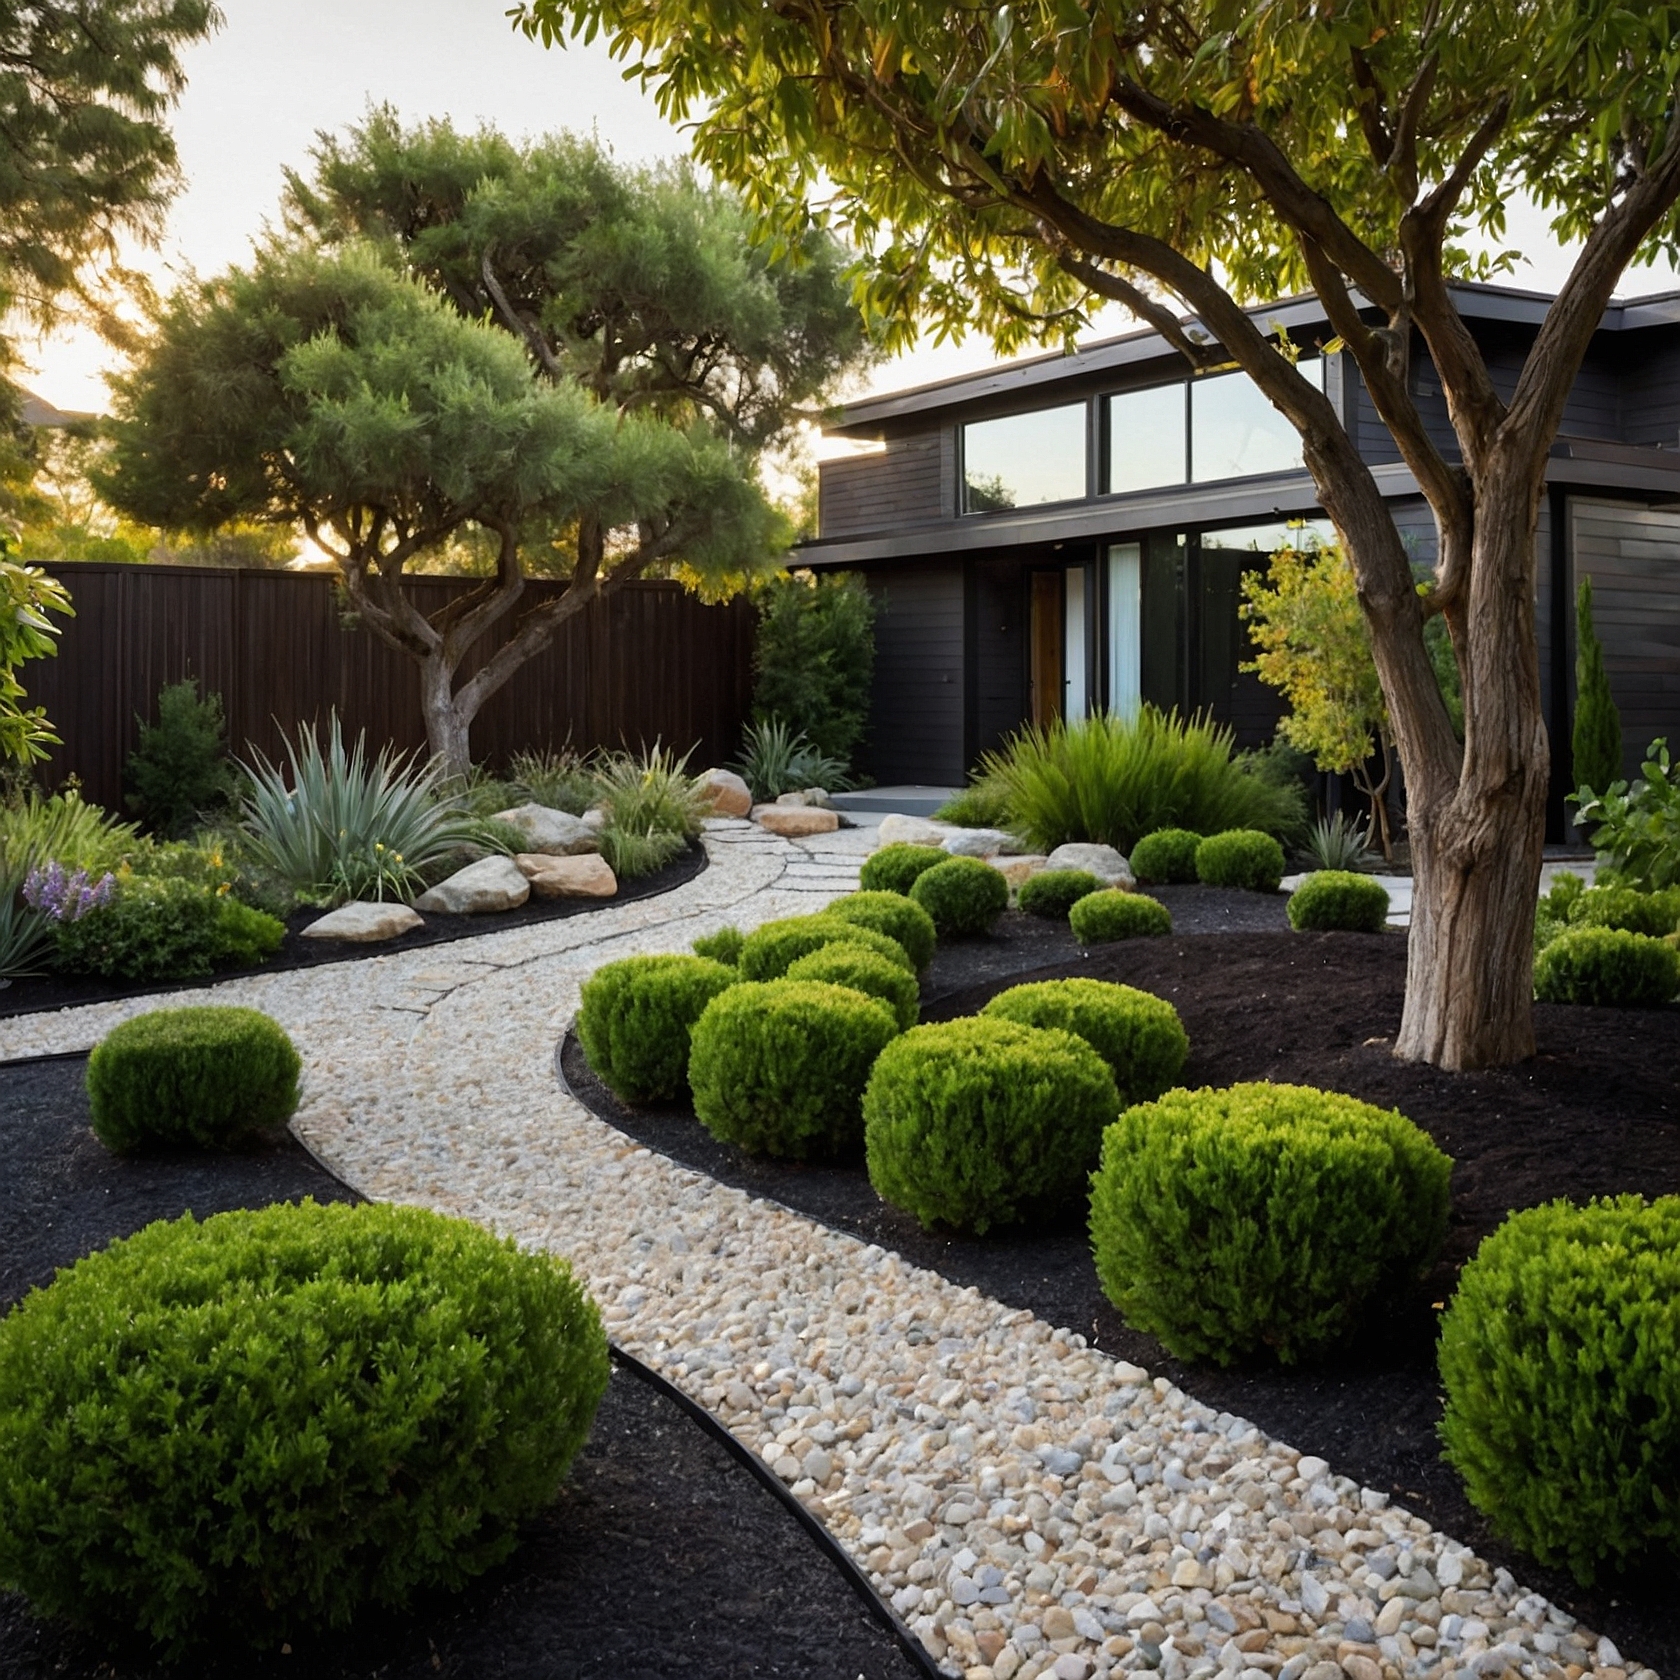 Modern Curving Patway With Shrubs And Trees